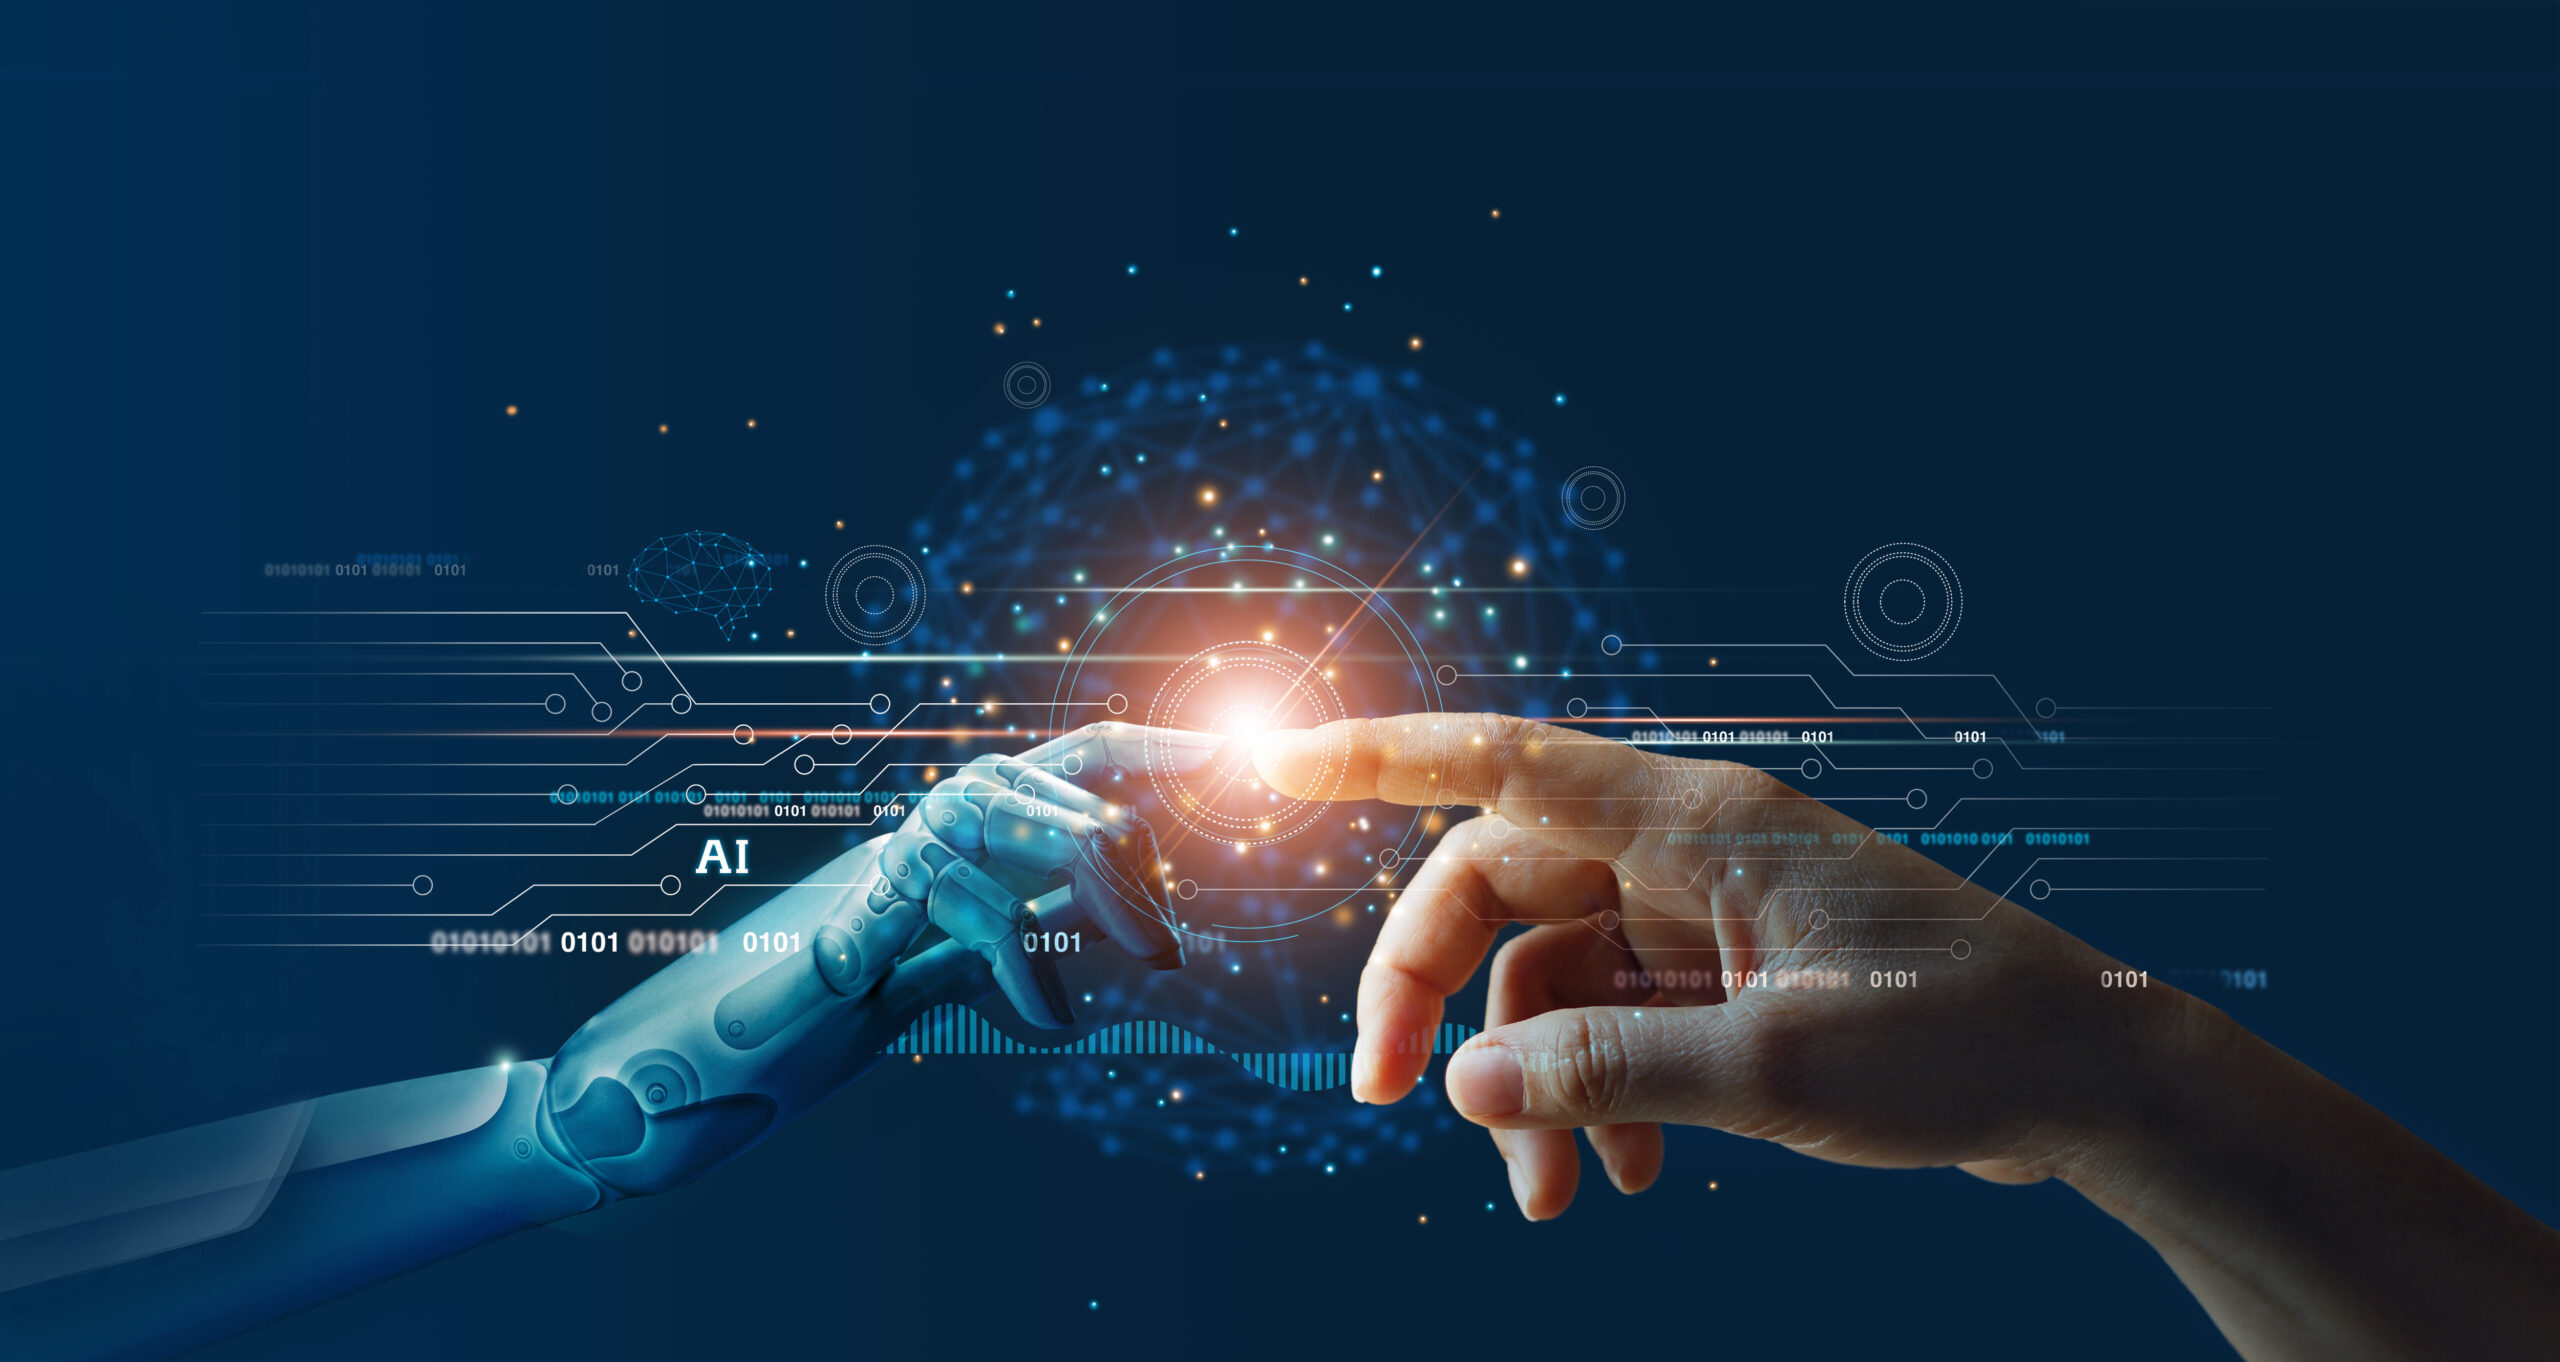 IA otimiza entrega last mile. Machine learning, Hands of robot and human touching on big data network connection background, Science and artificial intelligence technology, innovation and futuristic